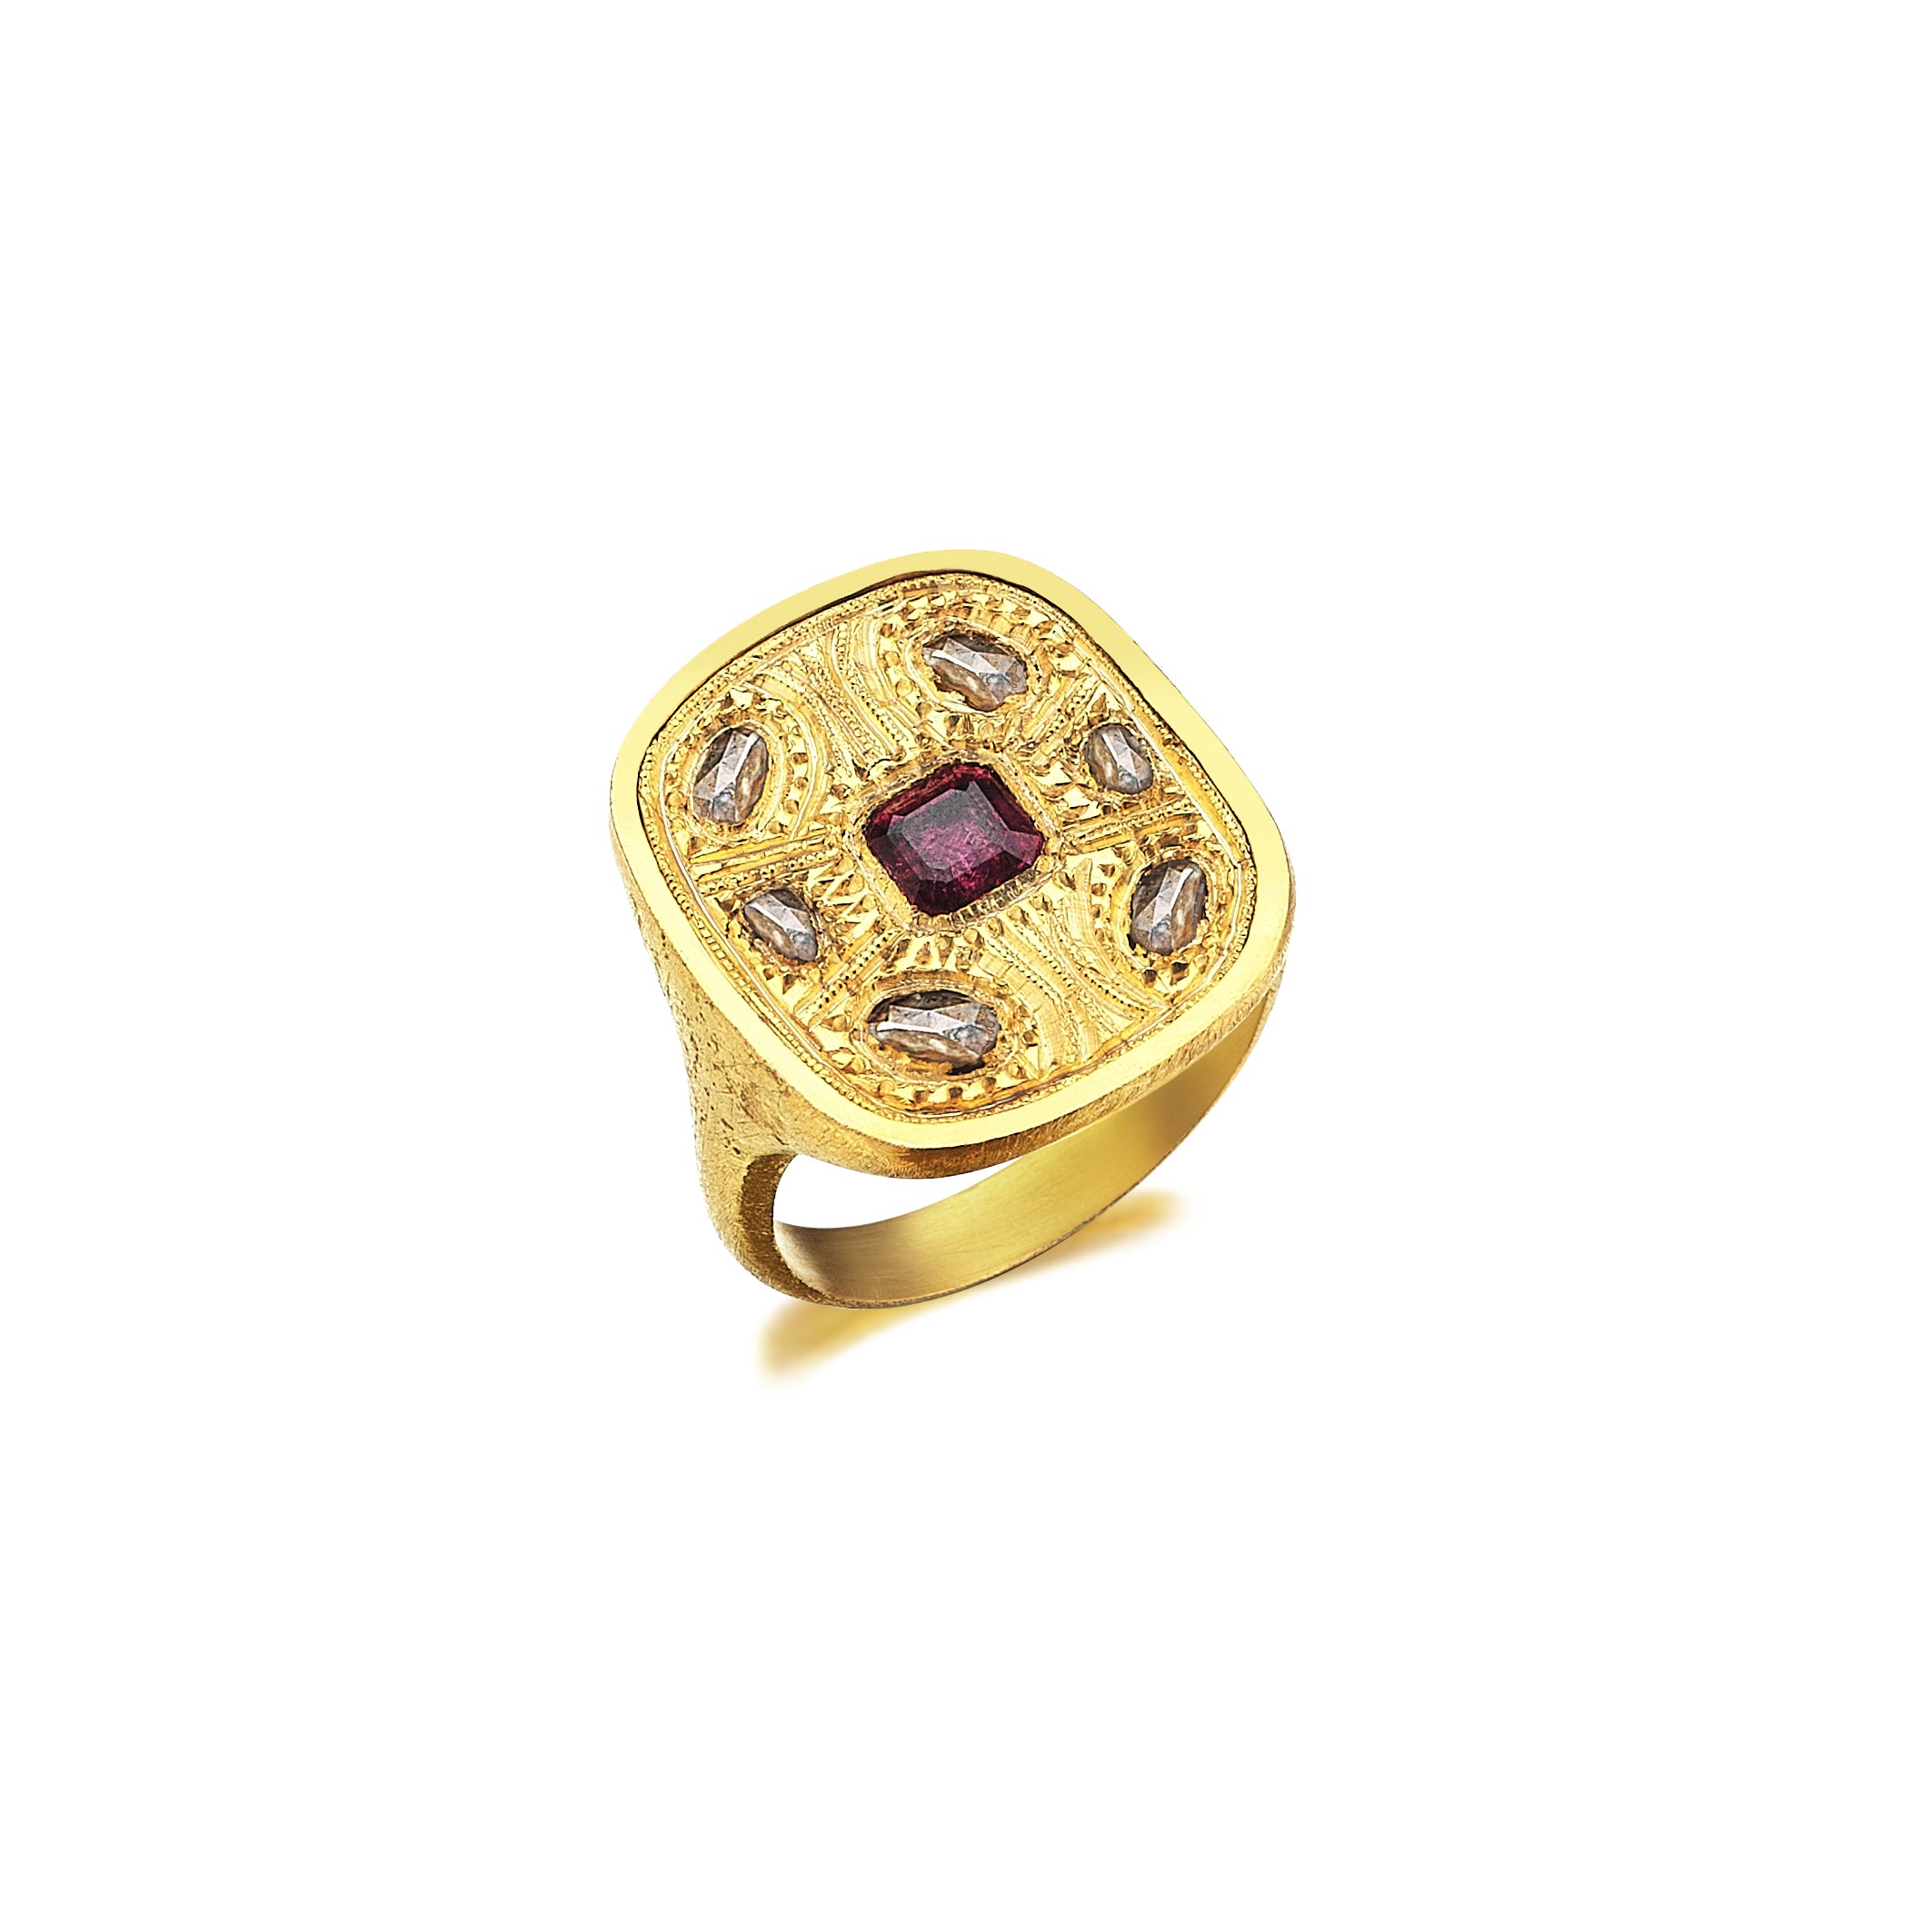 The Medici Ring